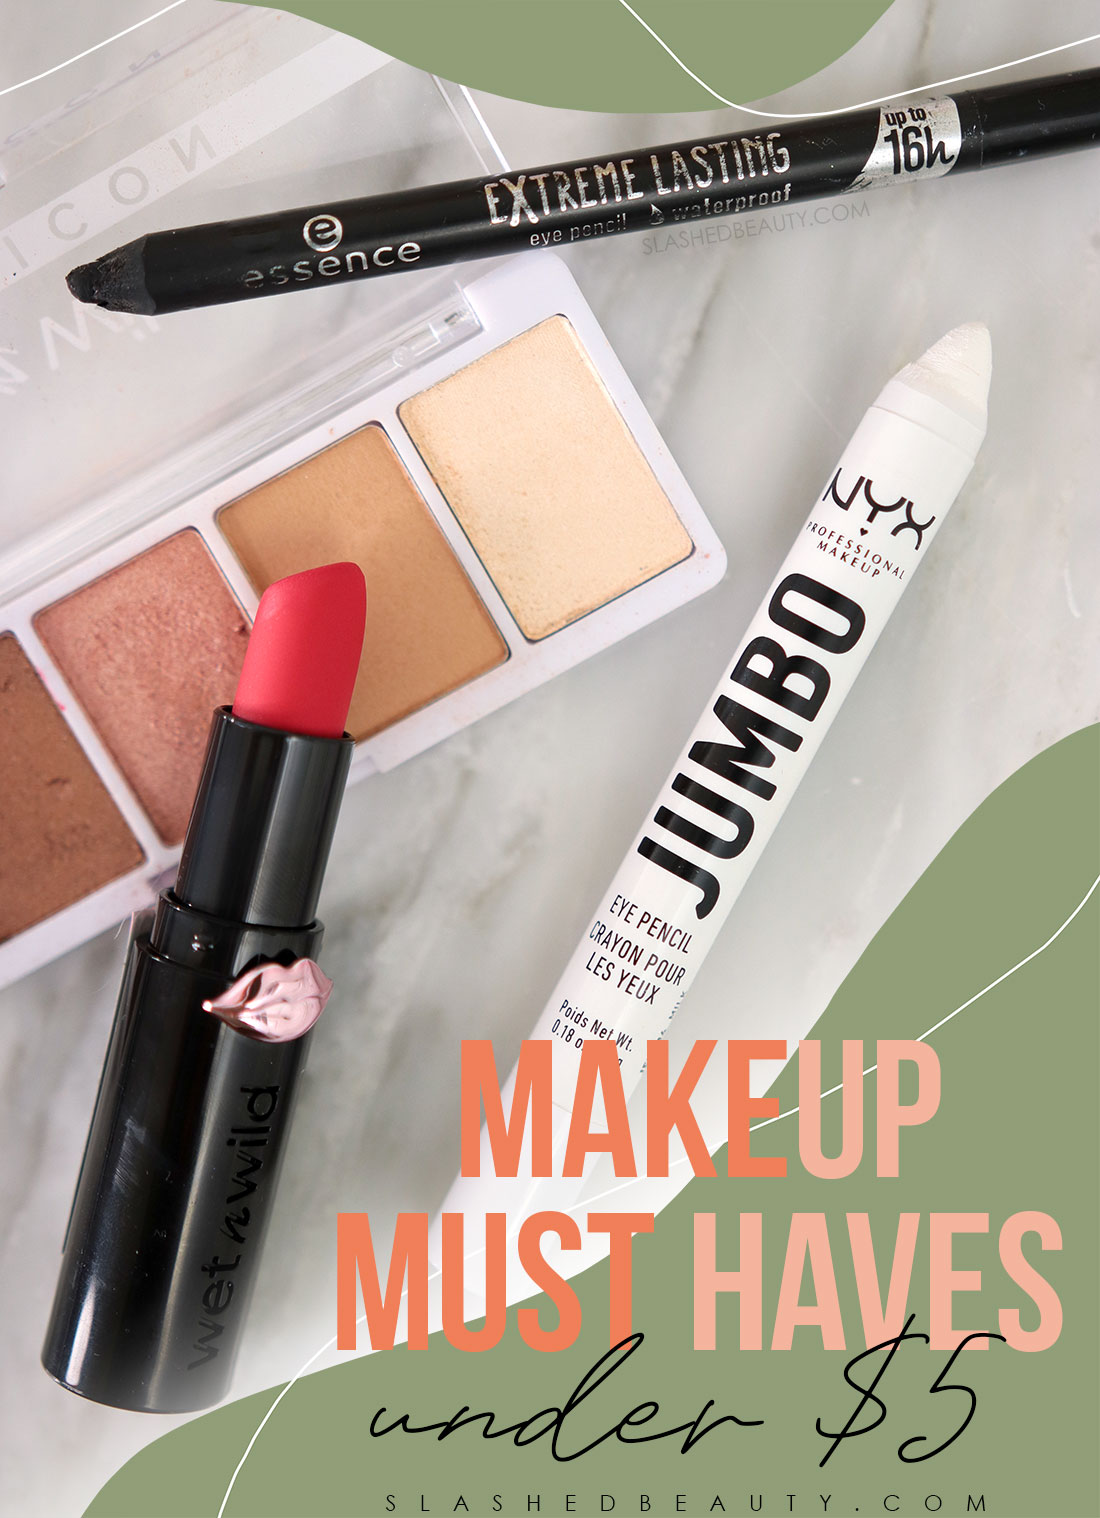 Drugstore makeup lying flat on a marble surface with text overlay: Makeup Must Haves Under  | Slashed Beauty